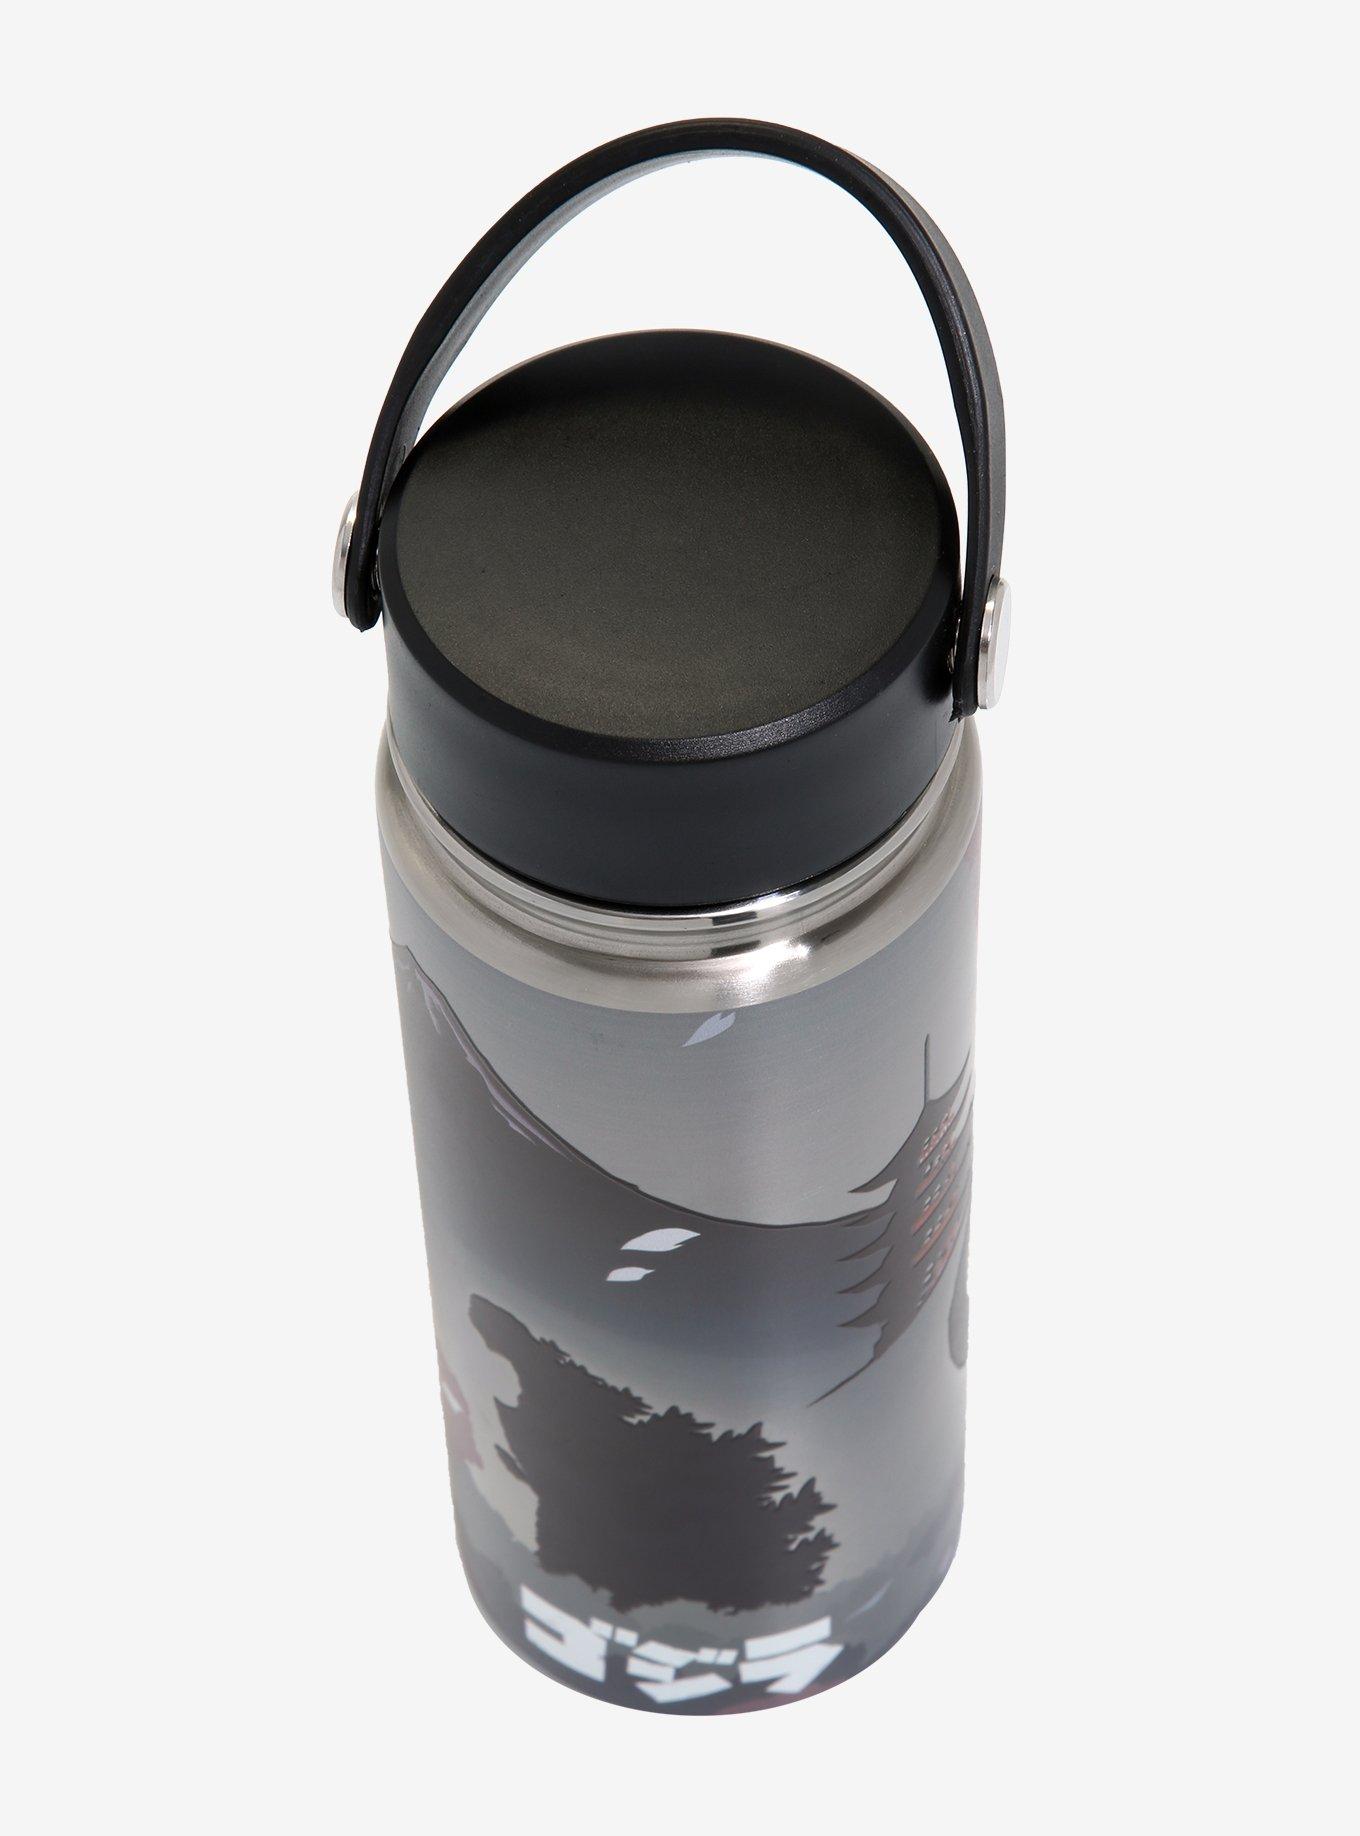 Godzilla 17 oz Stainless Steel Water Bottle : Buy Online at Best Price in  KSA - Souq is now : Home